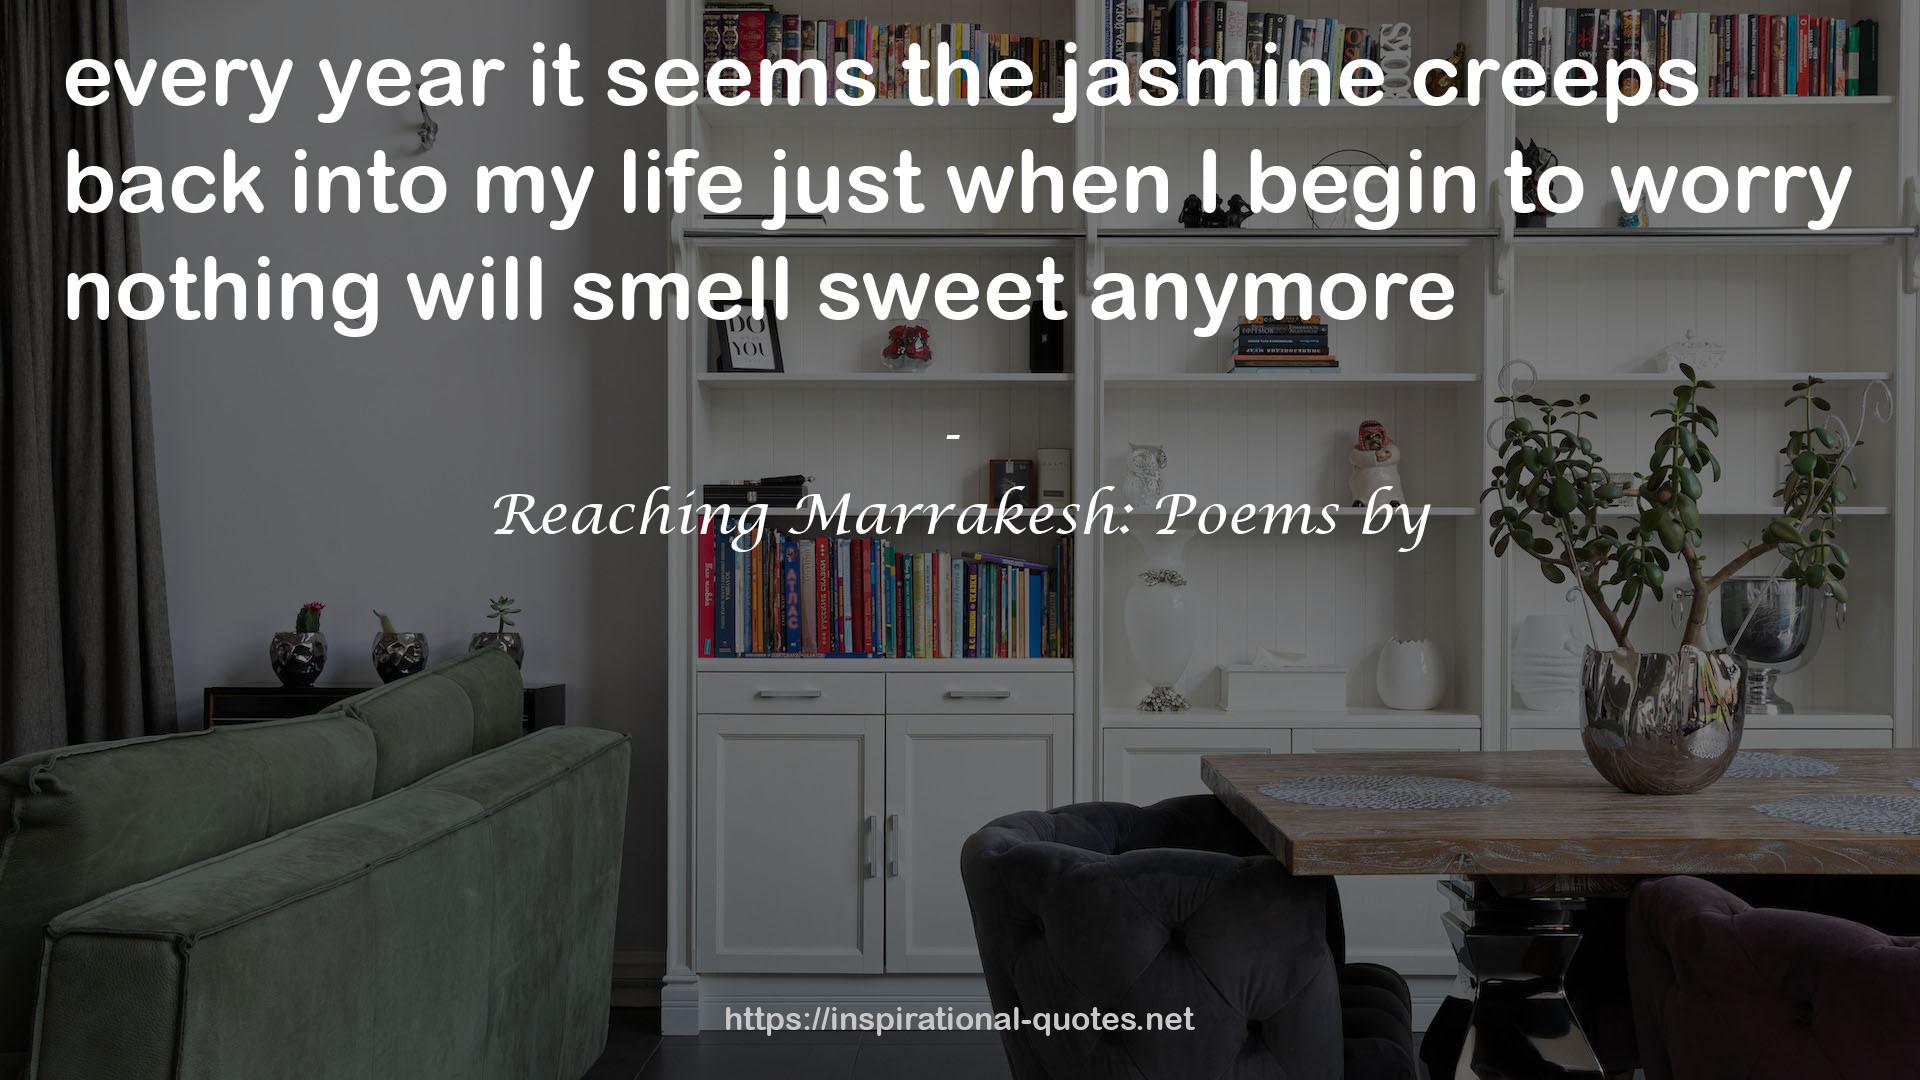 Reaching Marrakesh: Poems by QUOTES